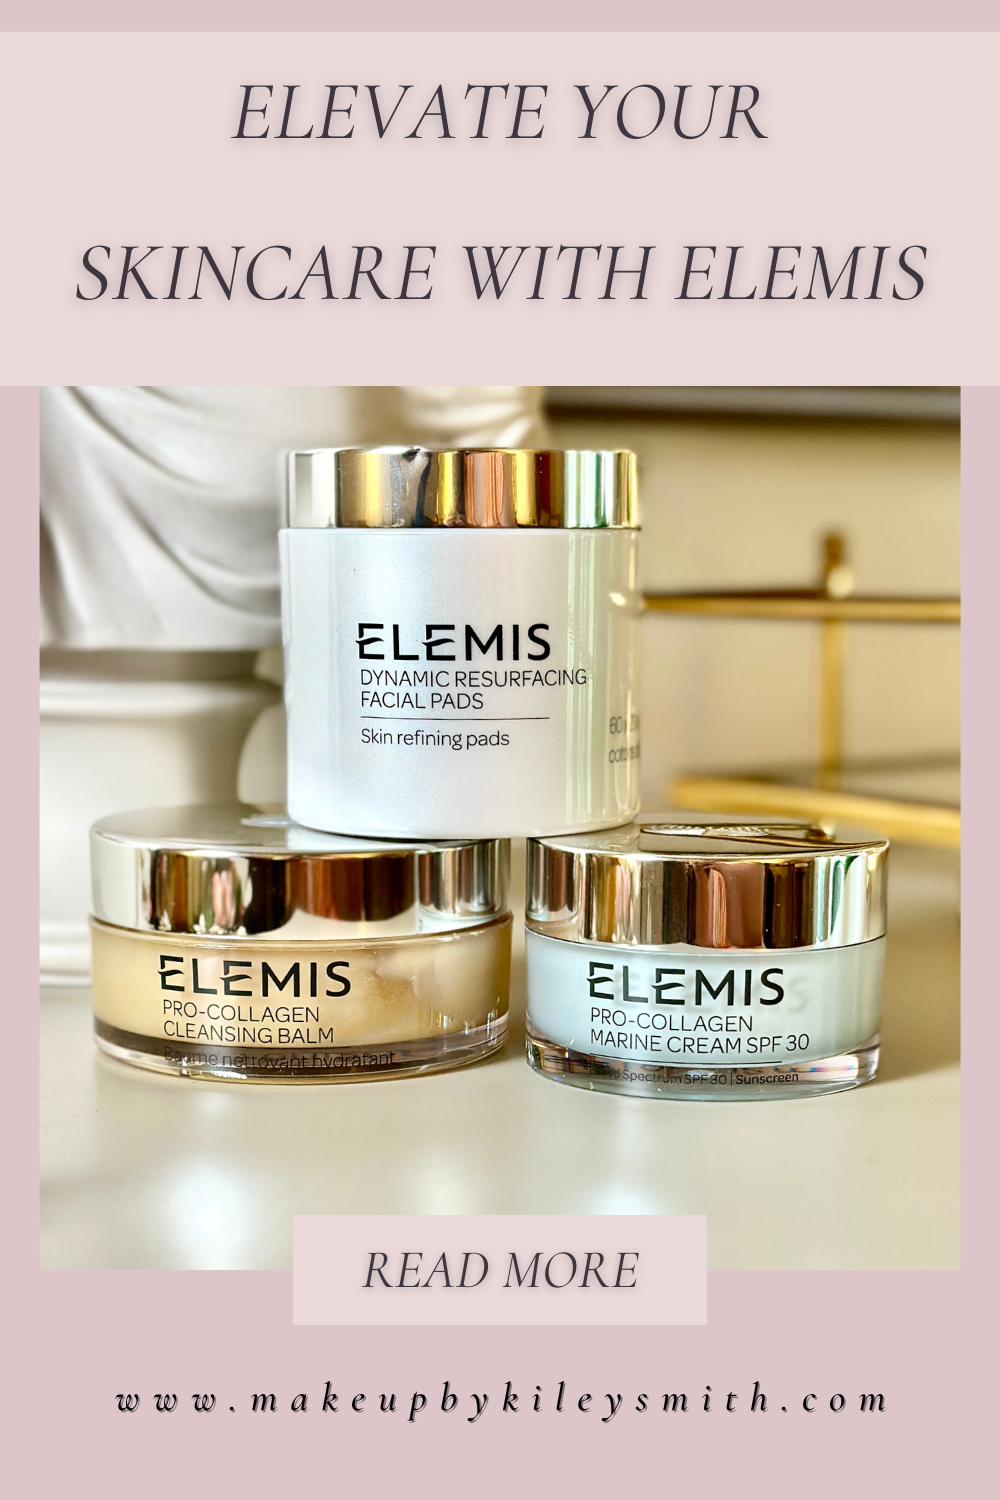 Three containers of Elemis skincare sit upon a white shelf.